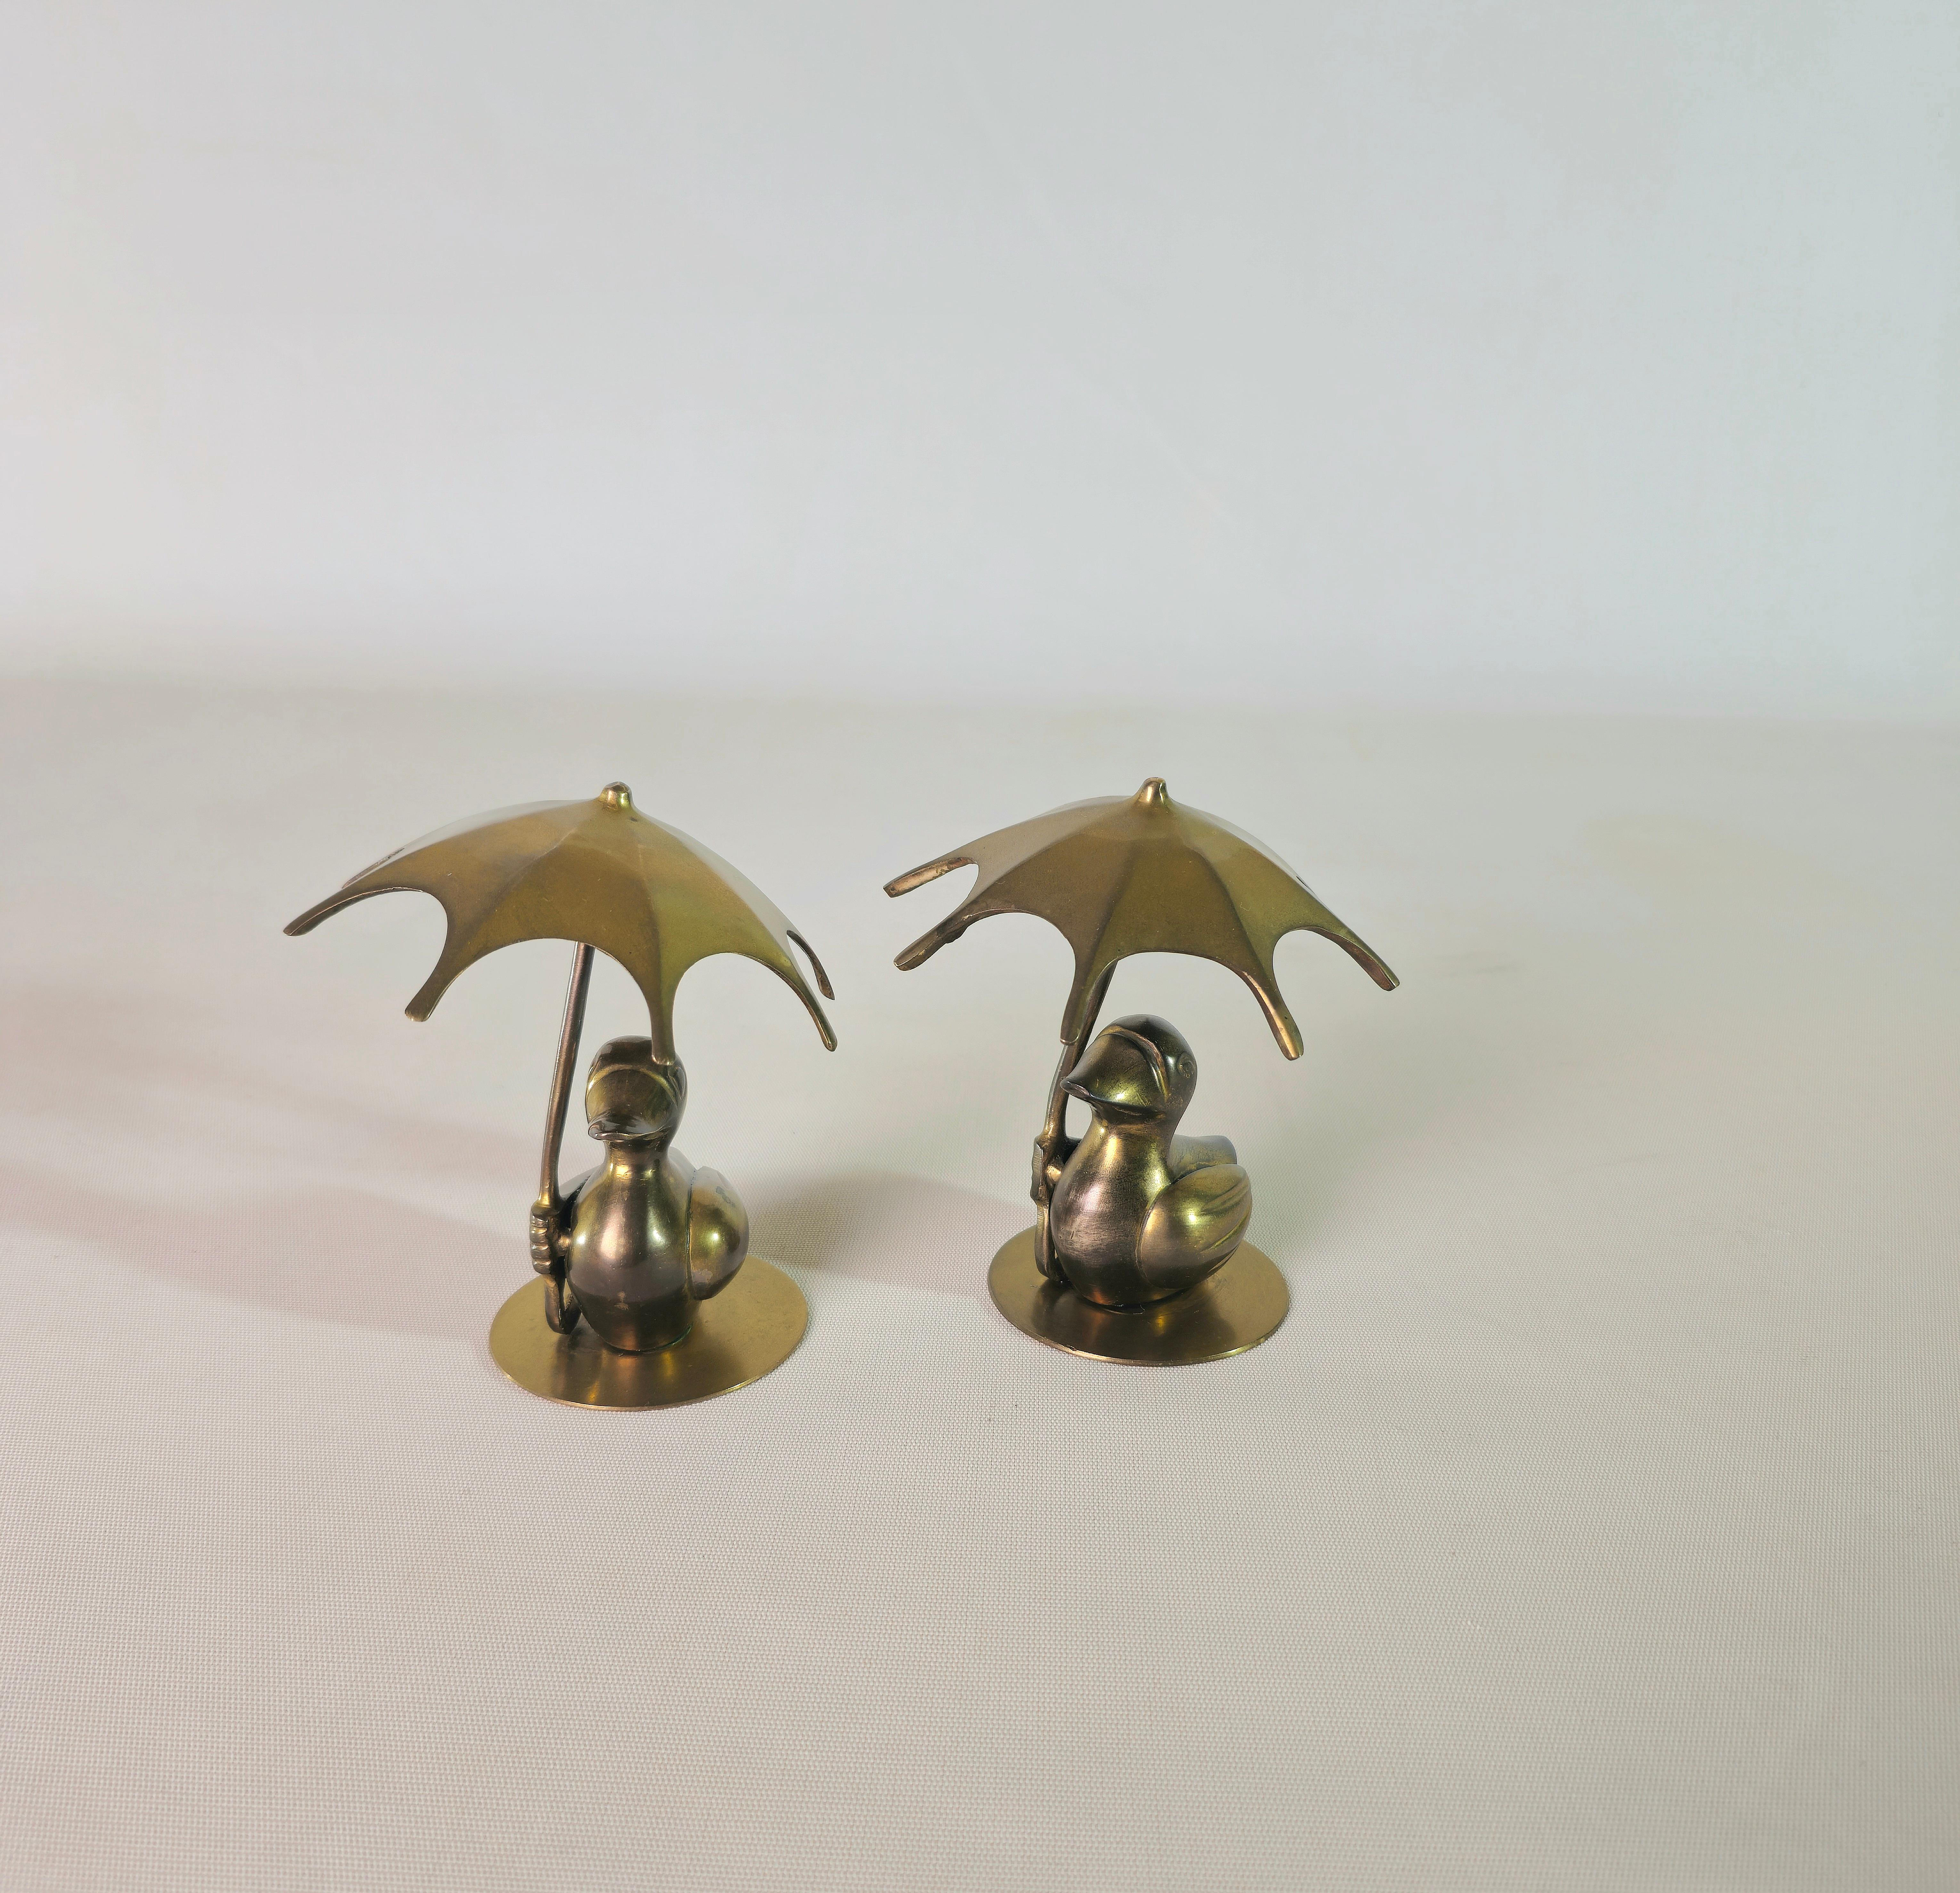 Two Brass Decorative Objects Midcentury Modern Italia 1960/70s For Sale 1